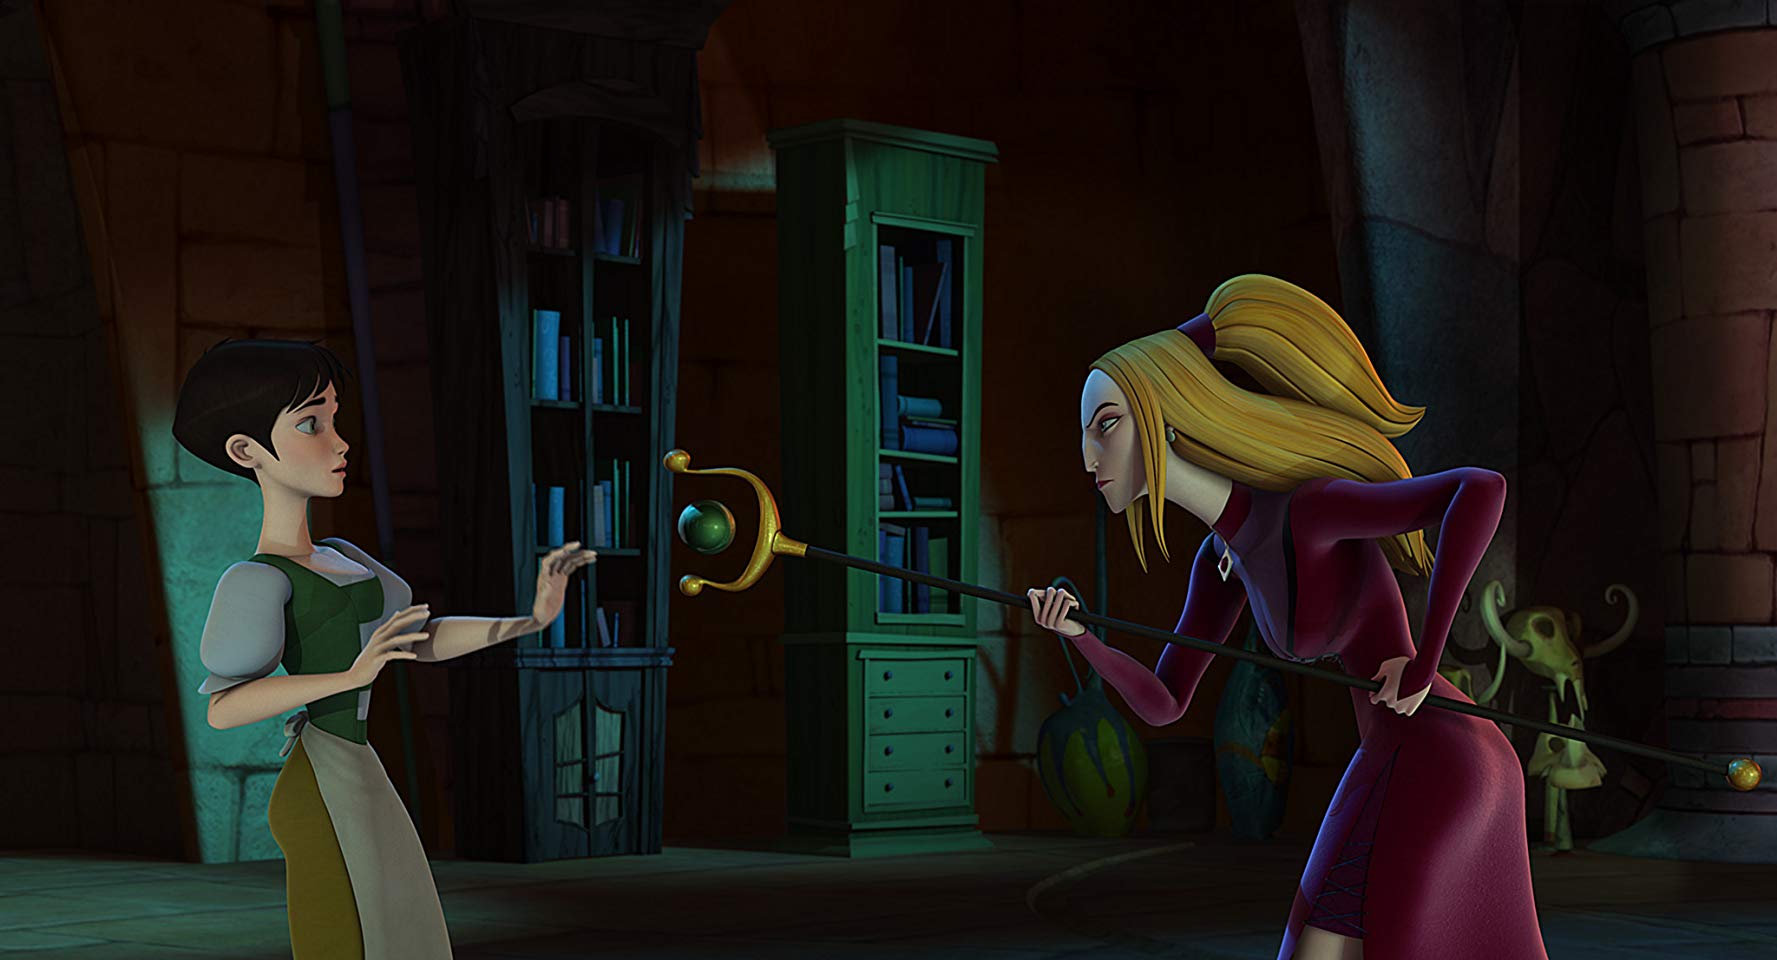 (l to r) Ella (voiced by Sarah Micelle Gellar) and Frieda, The Wicked Stepmother (voiced by Sigourney Weaver) in Happily N'Ever After (2006)